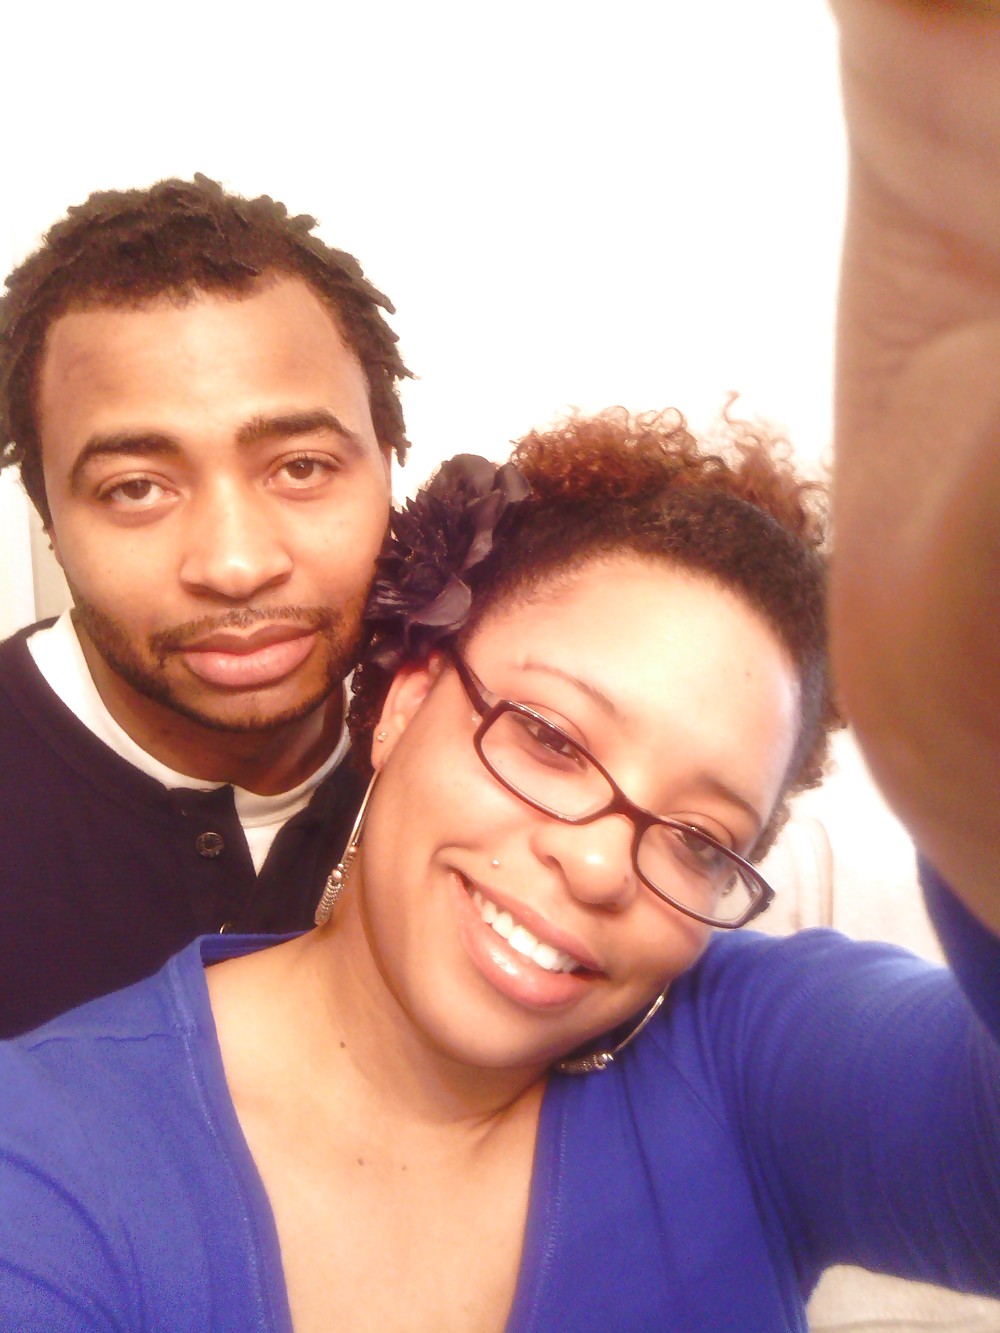 Me and hubby #1521315